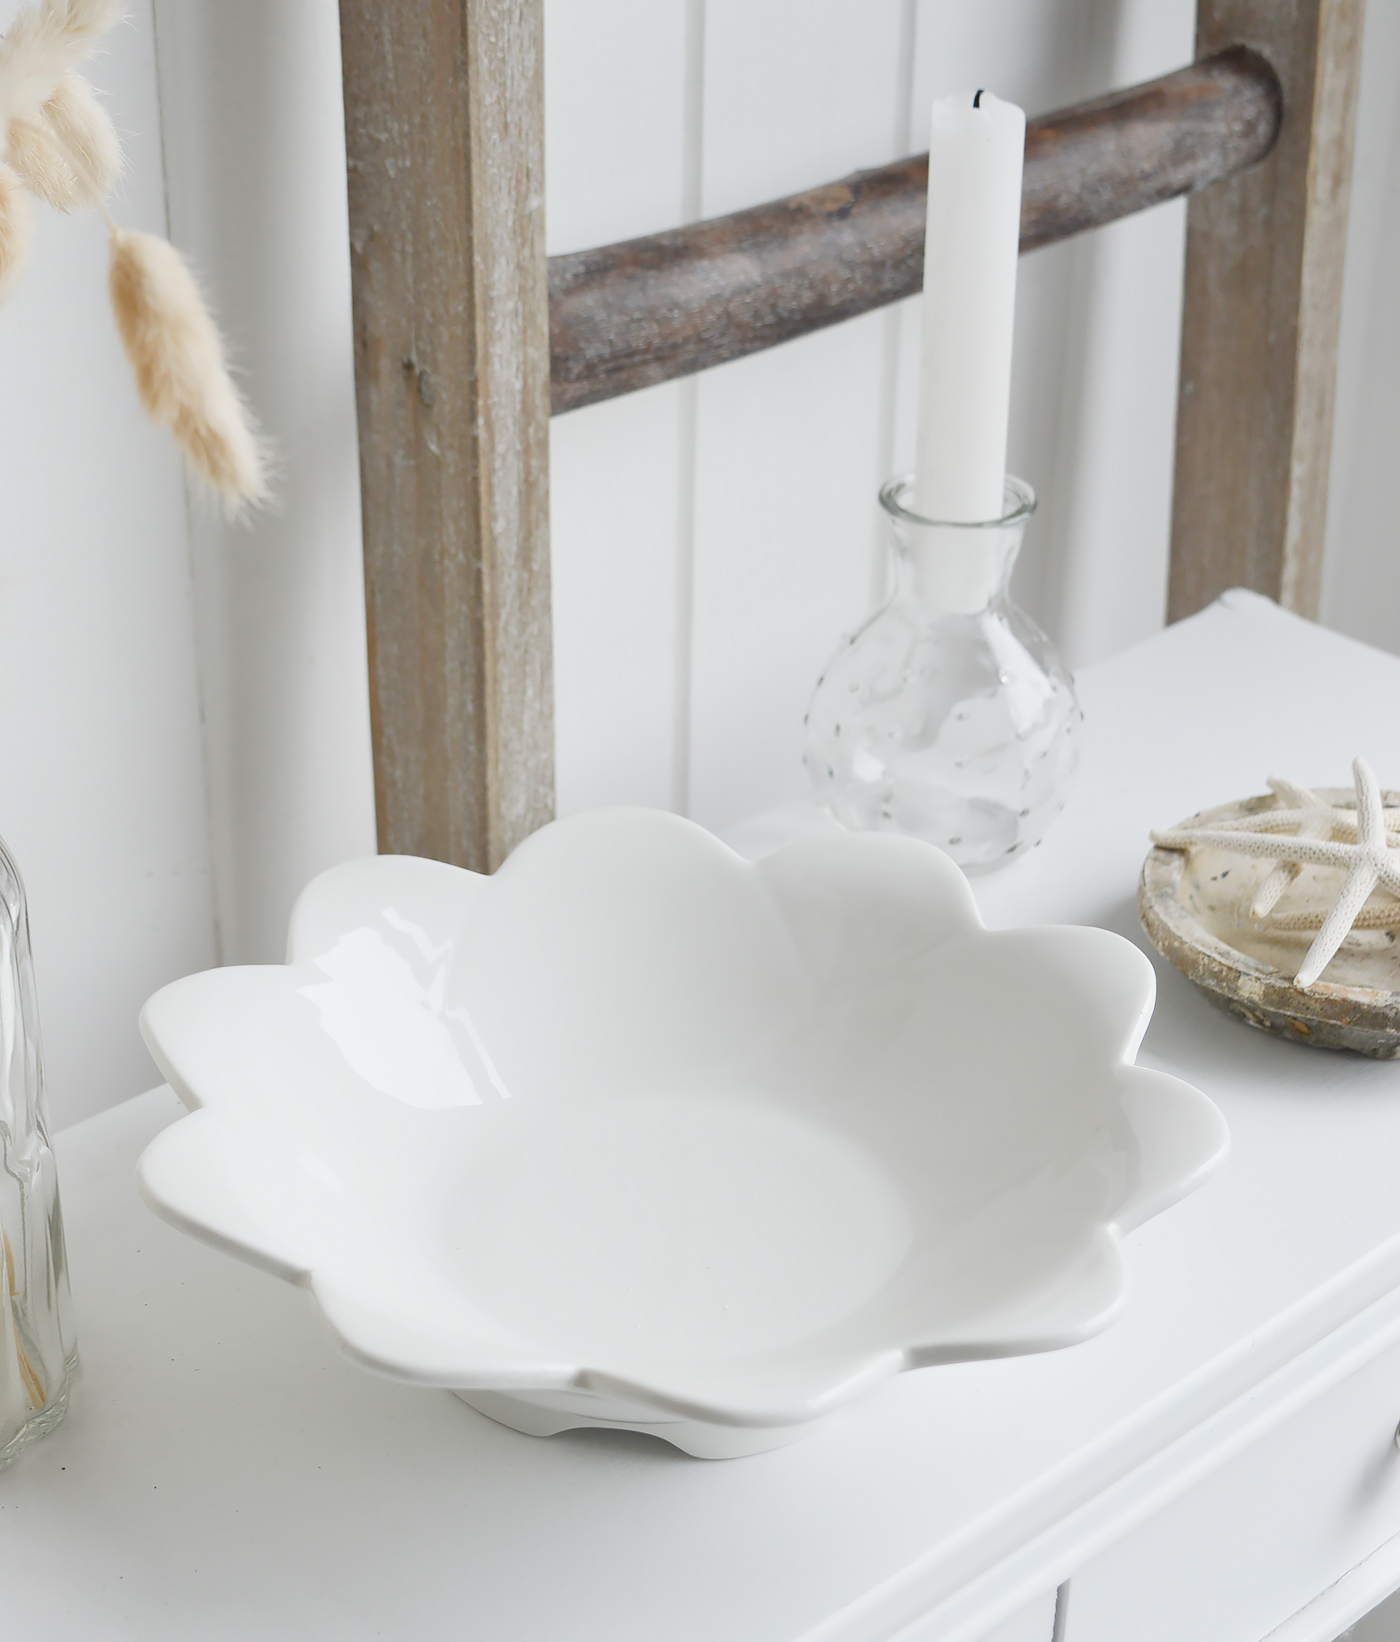 White Ceramic Pieces for New England White Interiors for coastal, country and modern farmhouse home interiors from The White Lighthouse - White Ceramic Flower Bowl